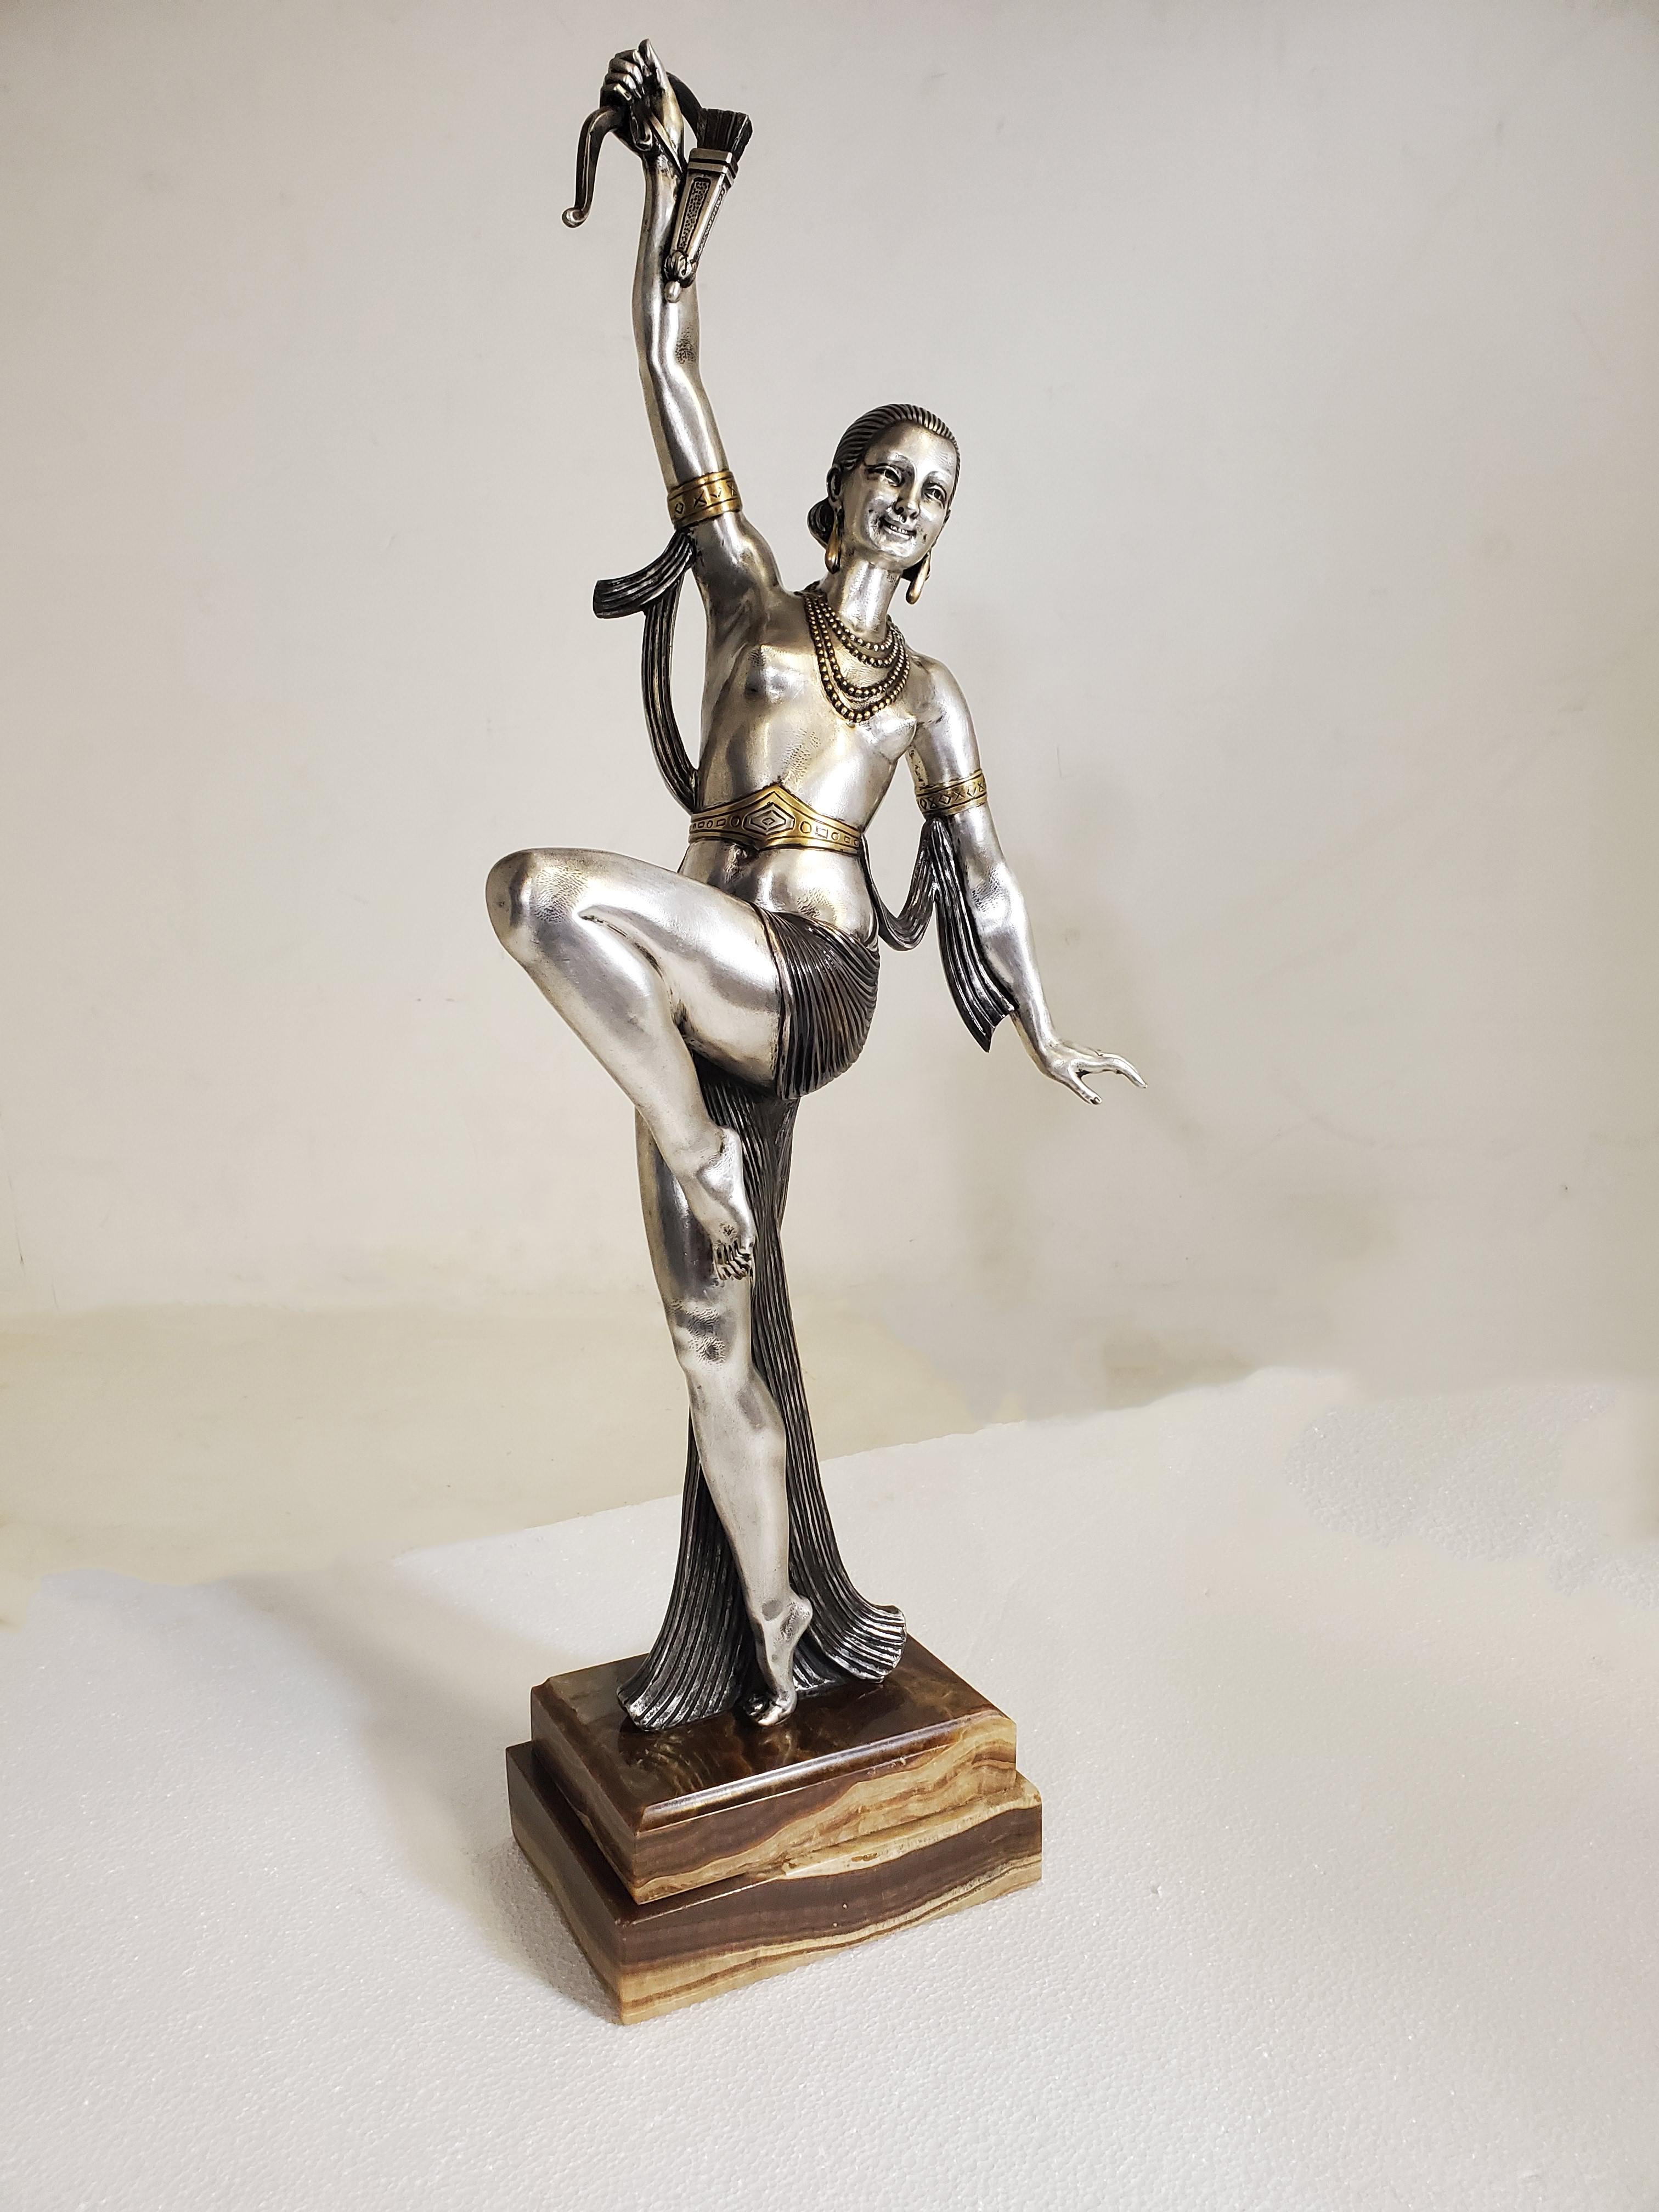 A tall original French Art Deco bronze sculpture of a semi-nude, female dancer holding a bow with arrow. 
 The striped cloth which drapes dramatically around the woman's body creates an interesting dialogue and complement to the graceful position of